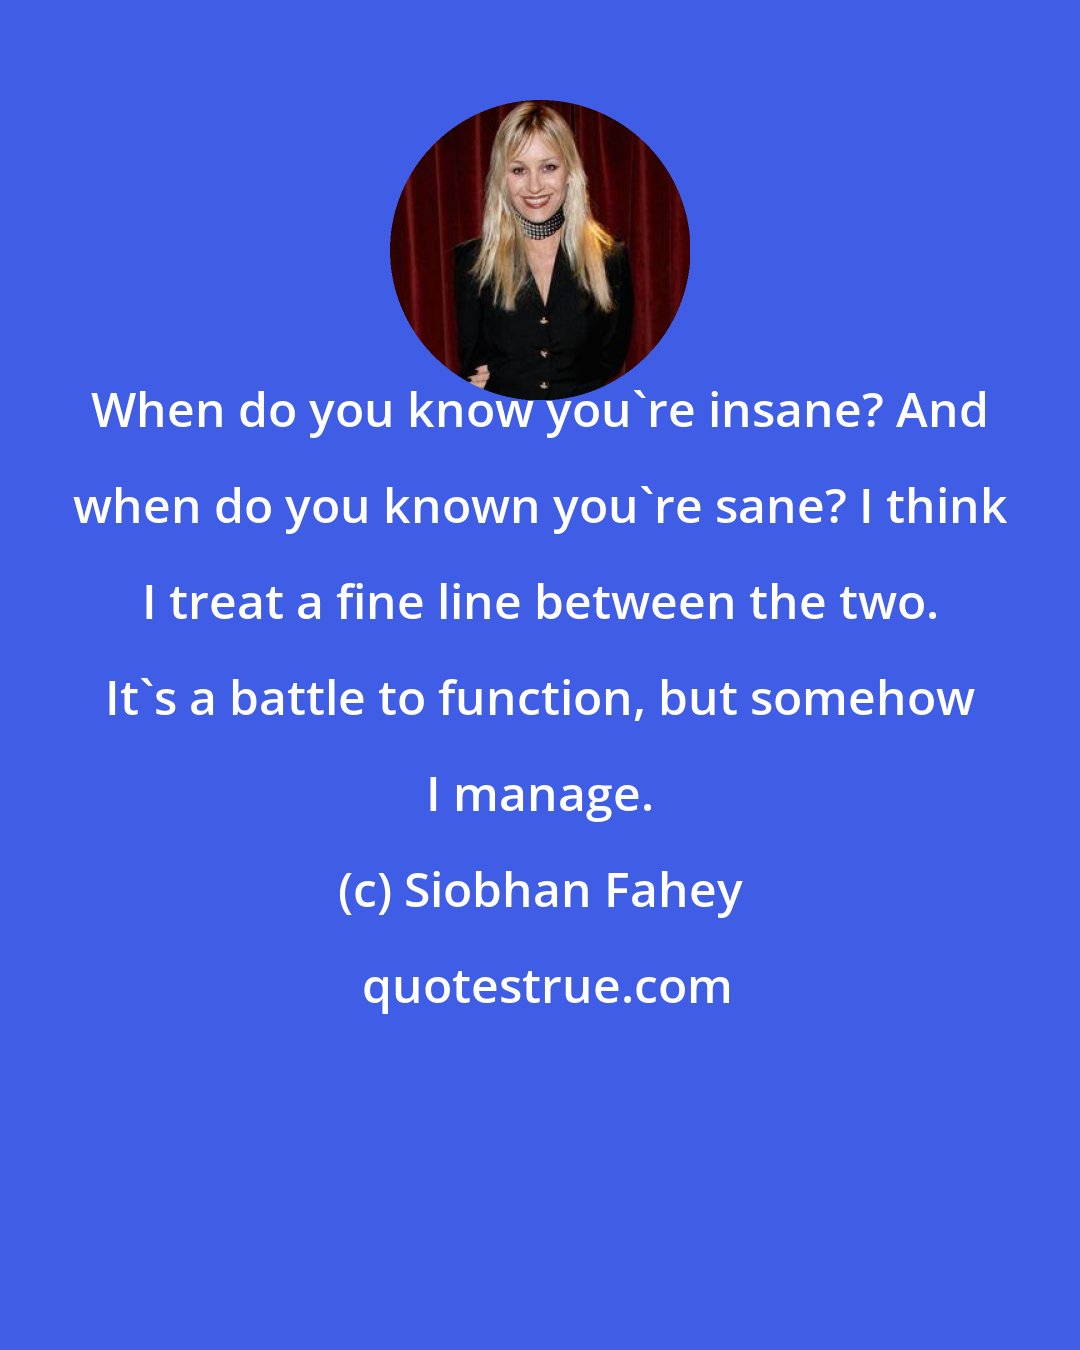 Siobhan Fahey: When do you know you're insane? And when do you known you're sane? I think I treat a fine line between the two. It's a battle to function, but somehow I manage.